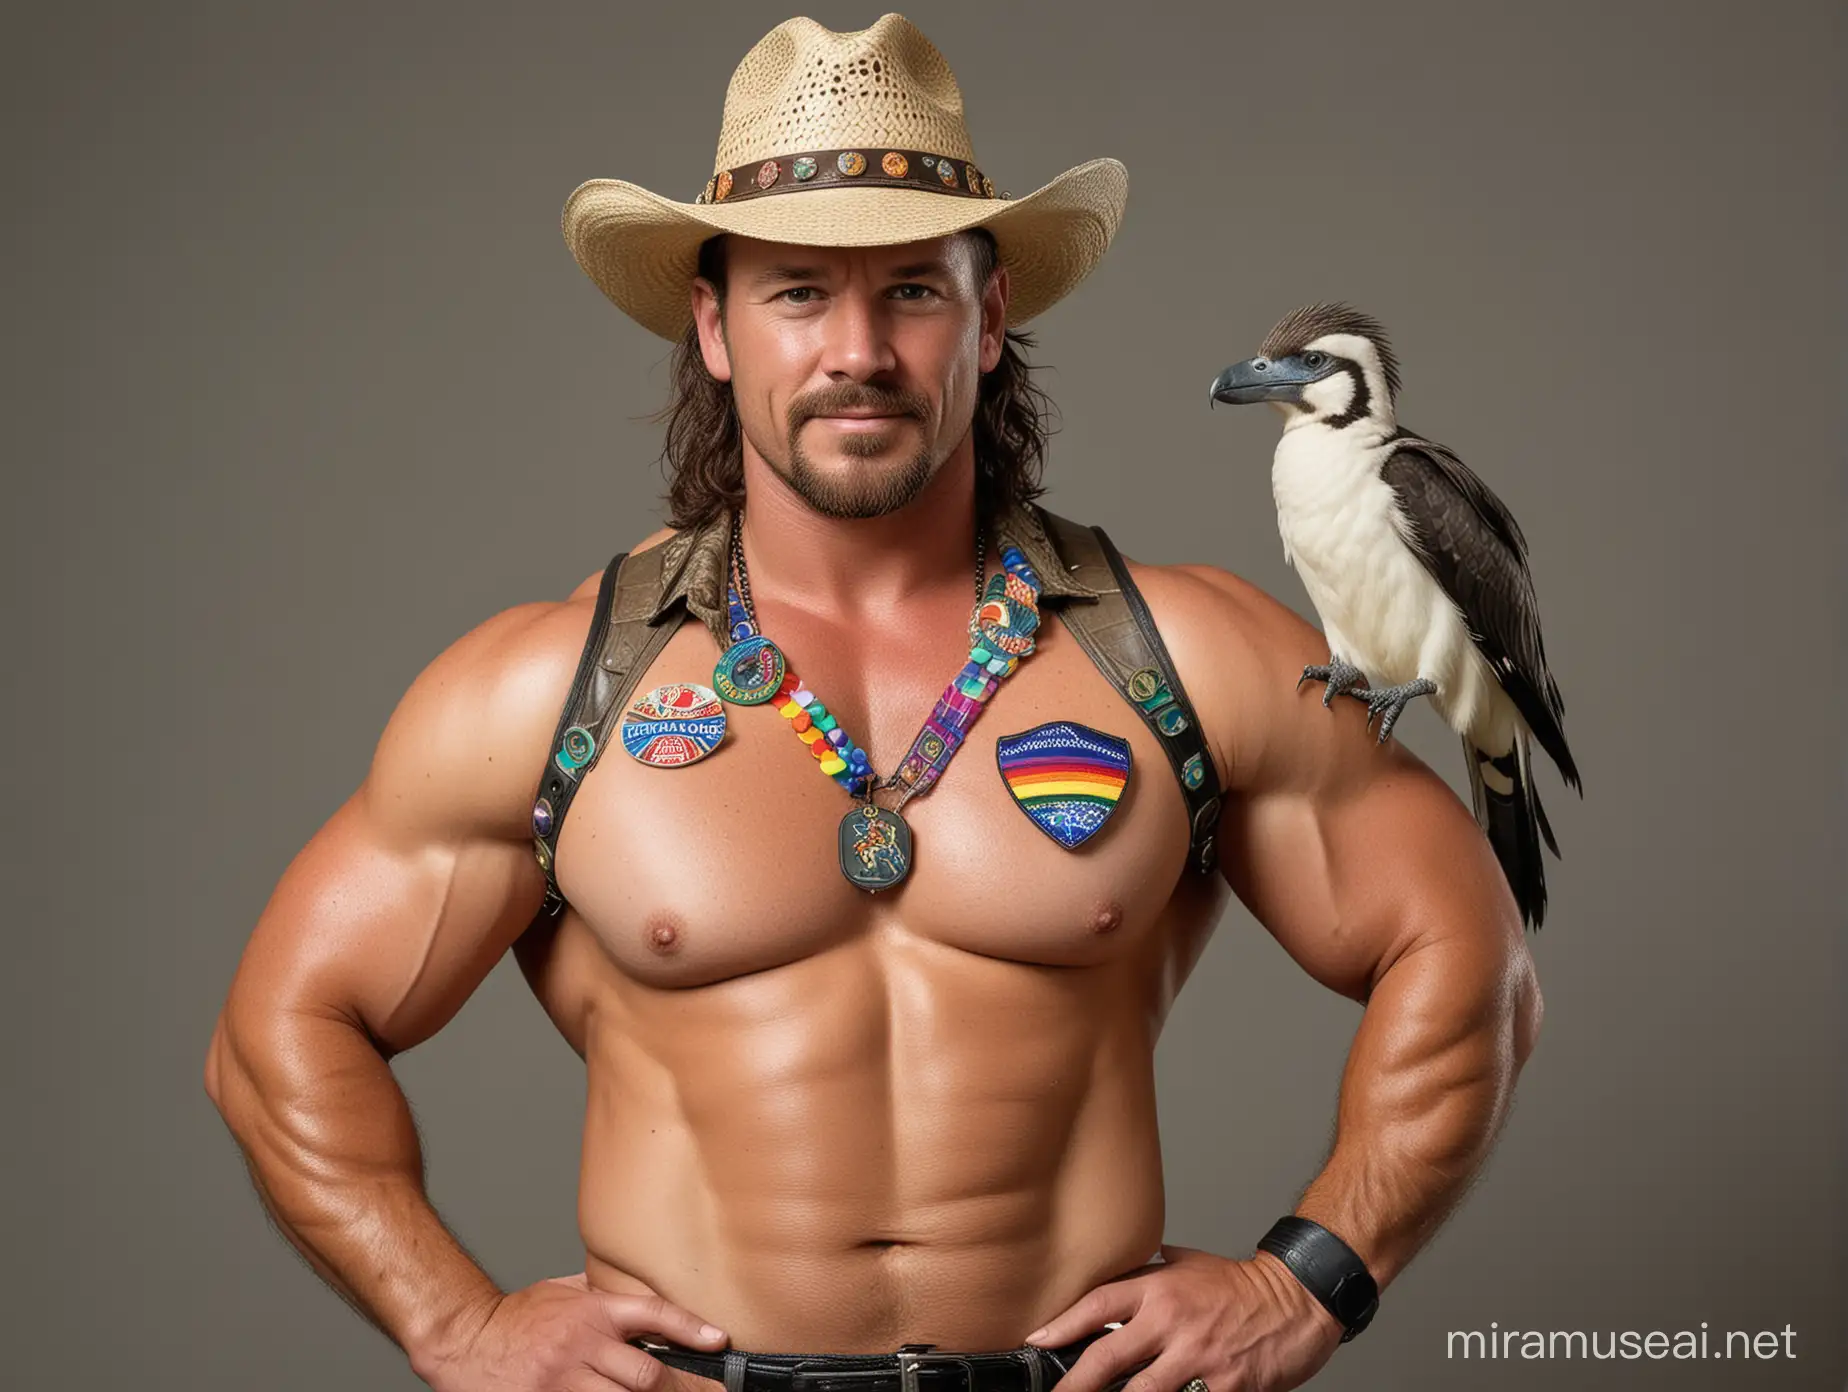 Muscular Australian Man in Unbuttoned Crocodile Dundee Outfit with Rainbow Badges and Kookaburra